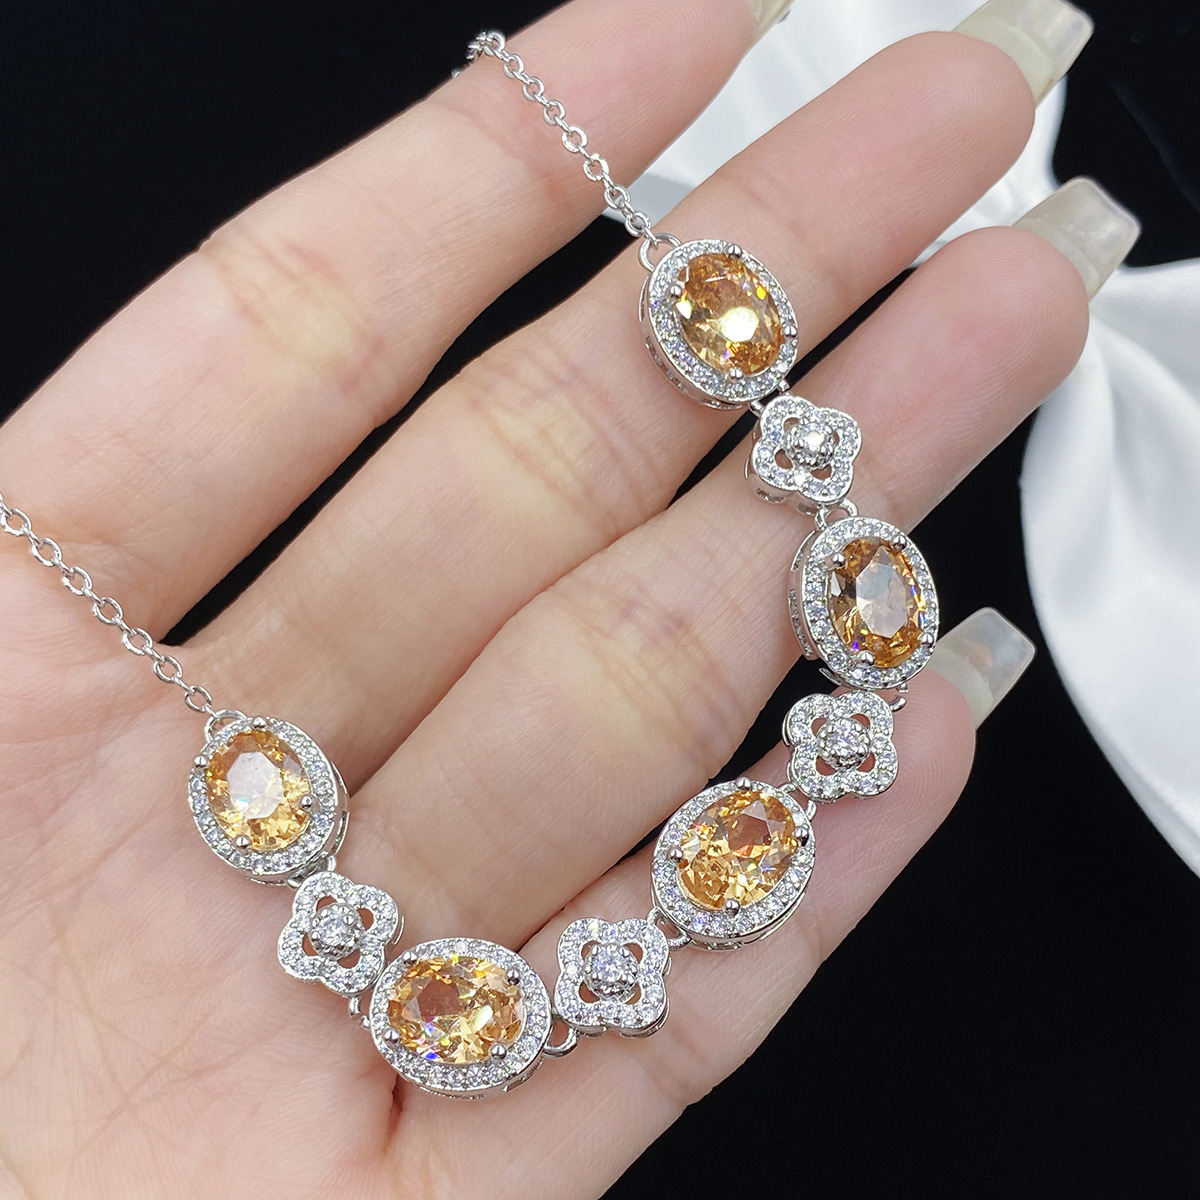 2024 INS TOP SELL Wedding Armband Sparkling Luxury Jewelry 925 Sterling Silver Oval Cut Champagne Diamond Cz Gemstones Party Elegant Women Bangle Gift